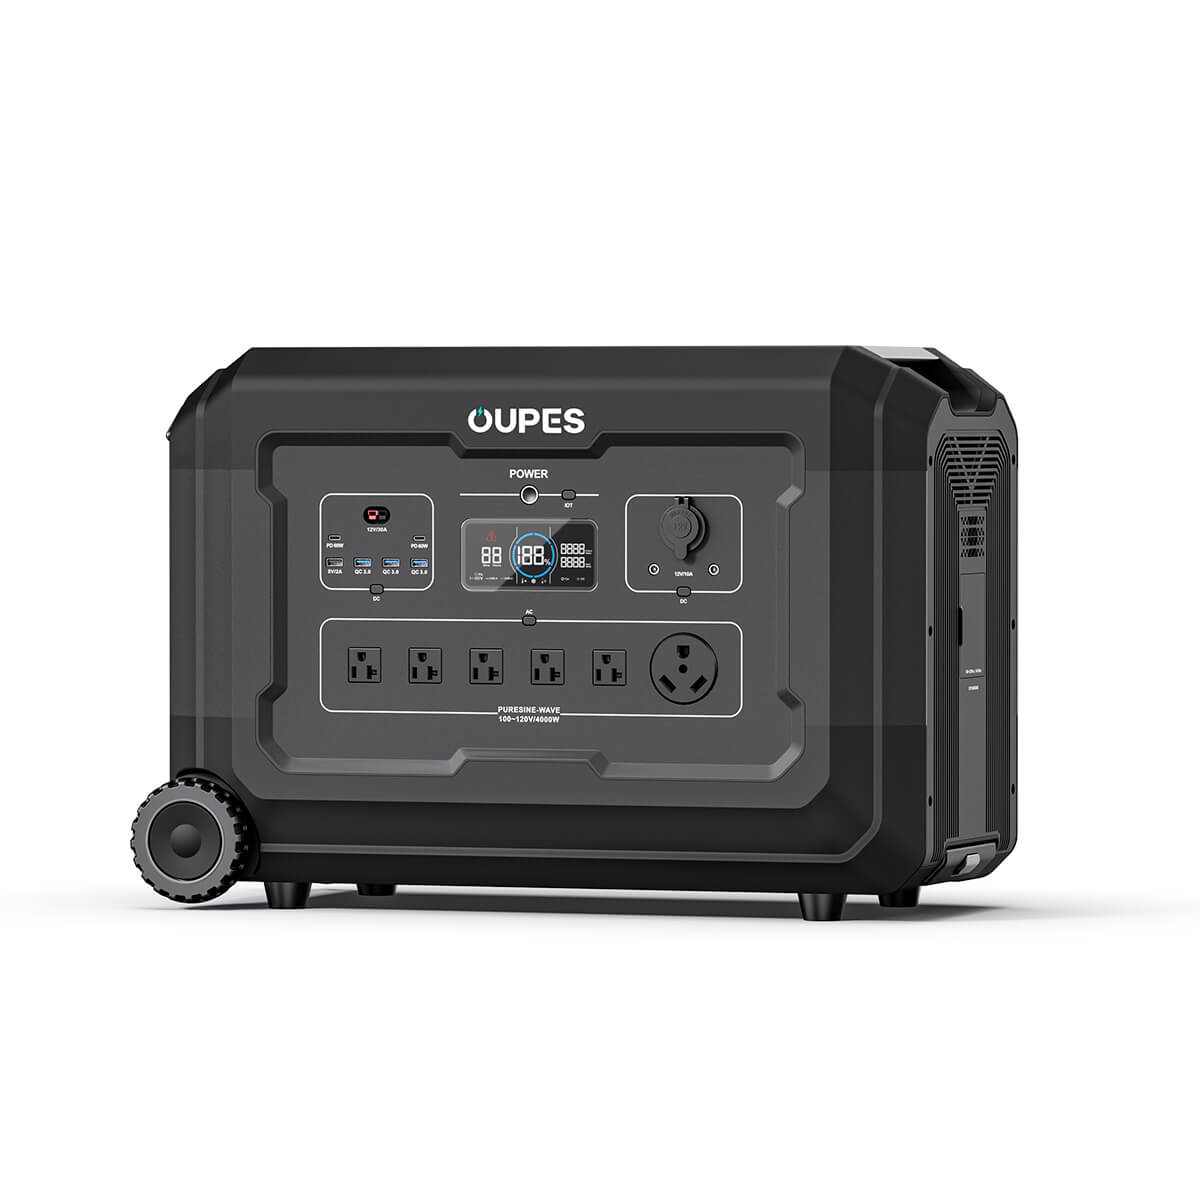 OUPES Mega 5 Home Backup & Portable Power Station | 4000W 5040Wh - OUPES